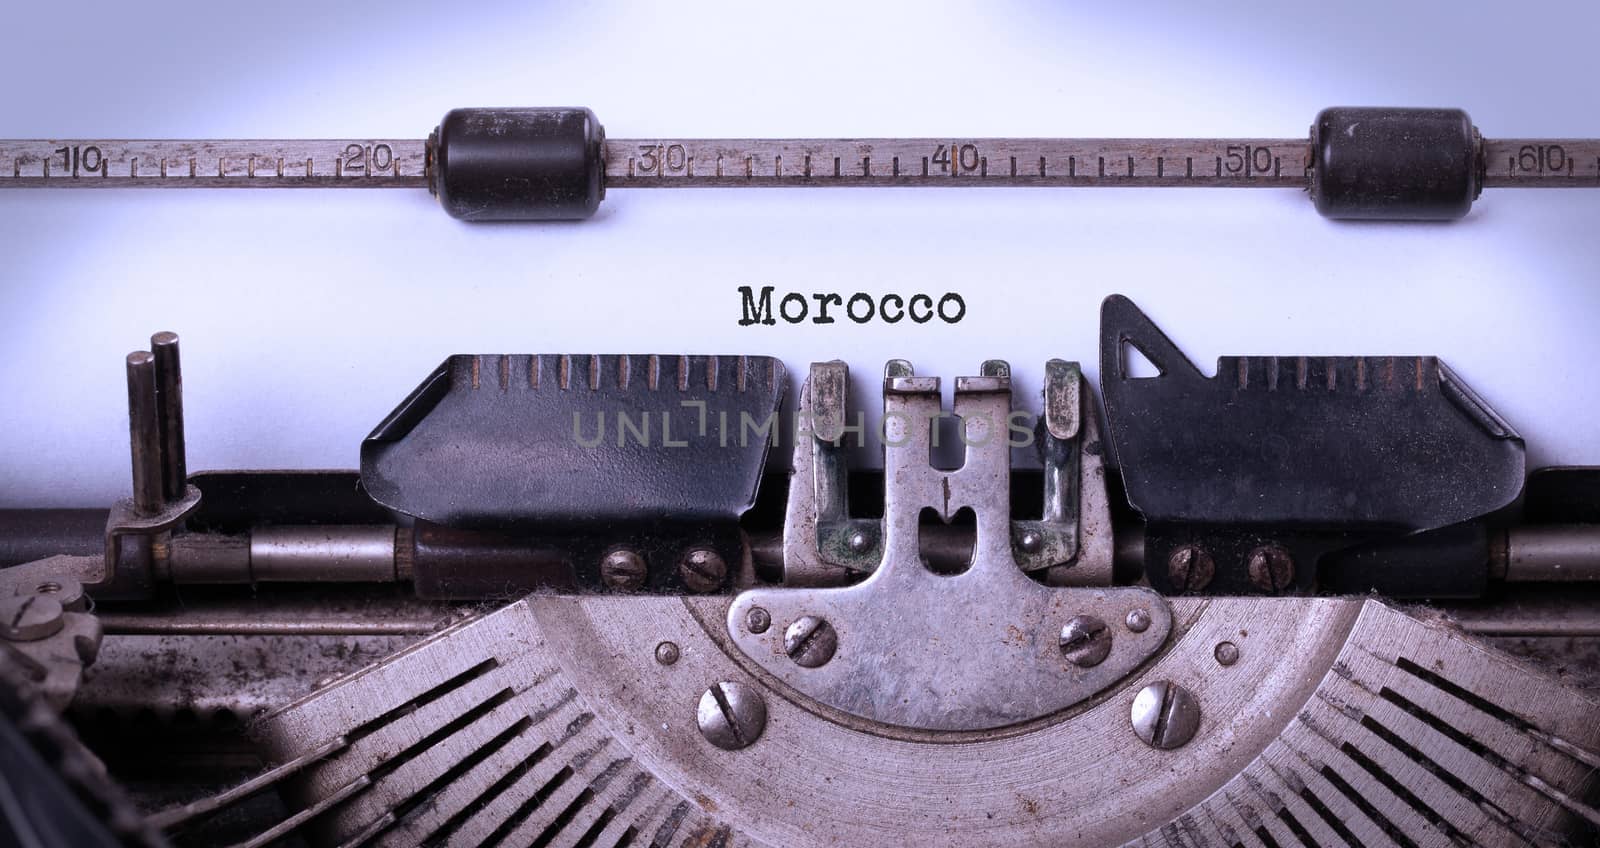 Inscription made by vintage typewriter, country, Morocco